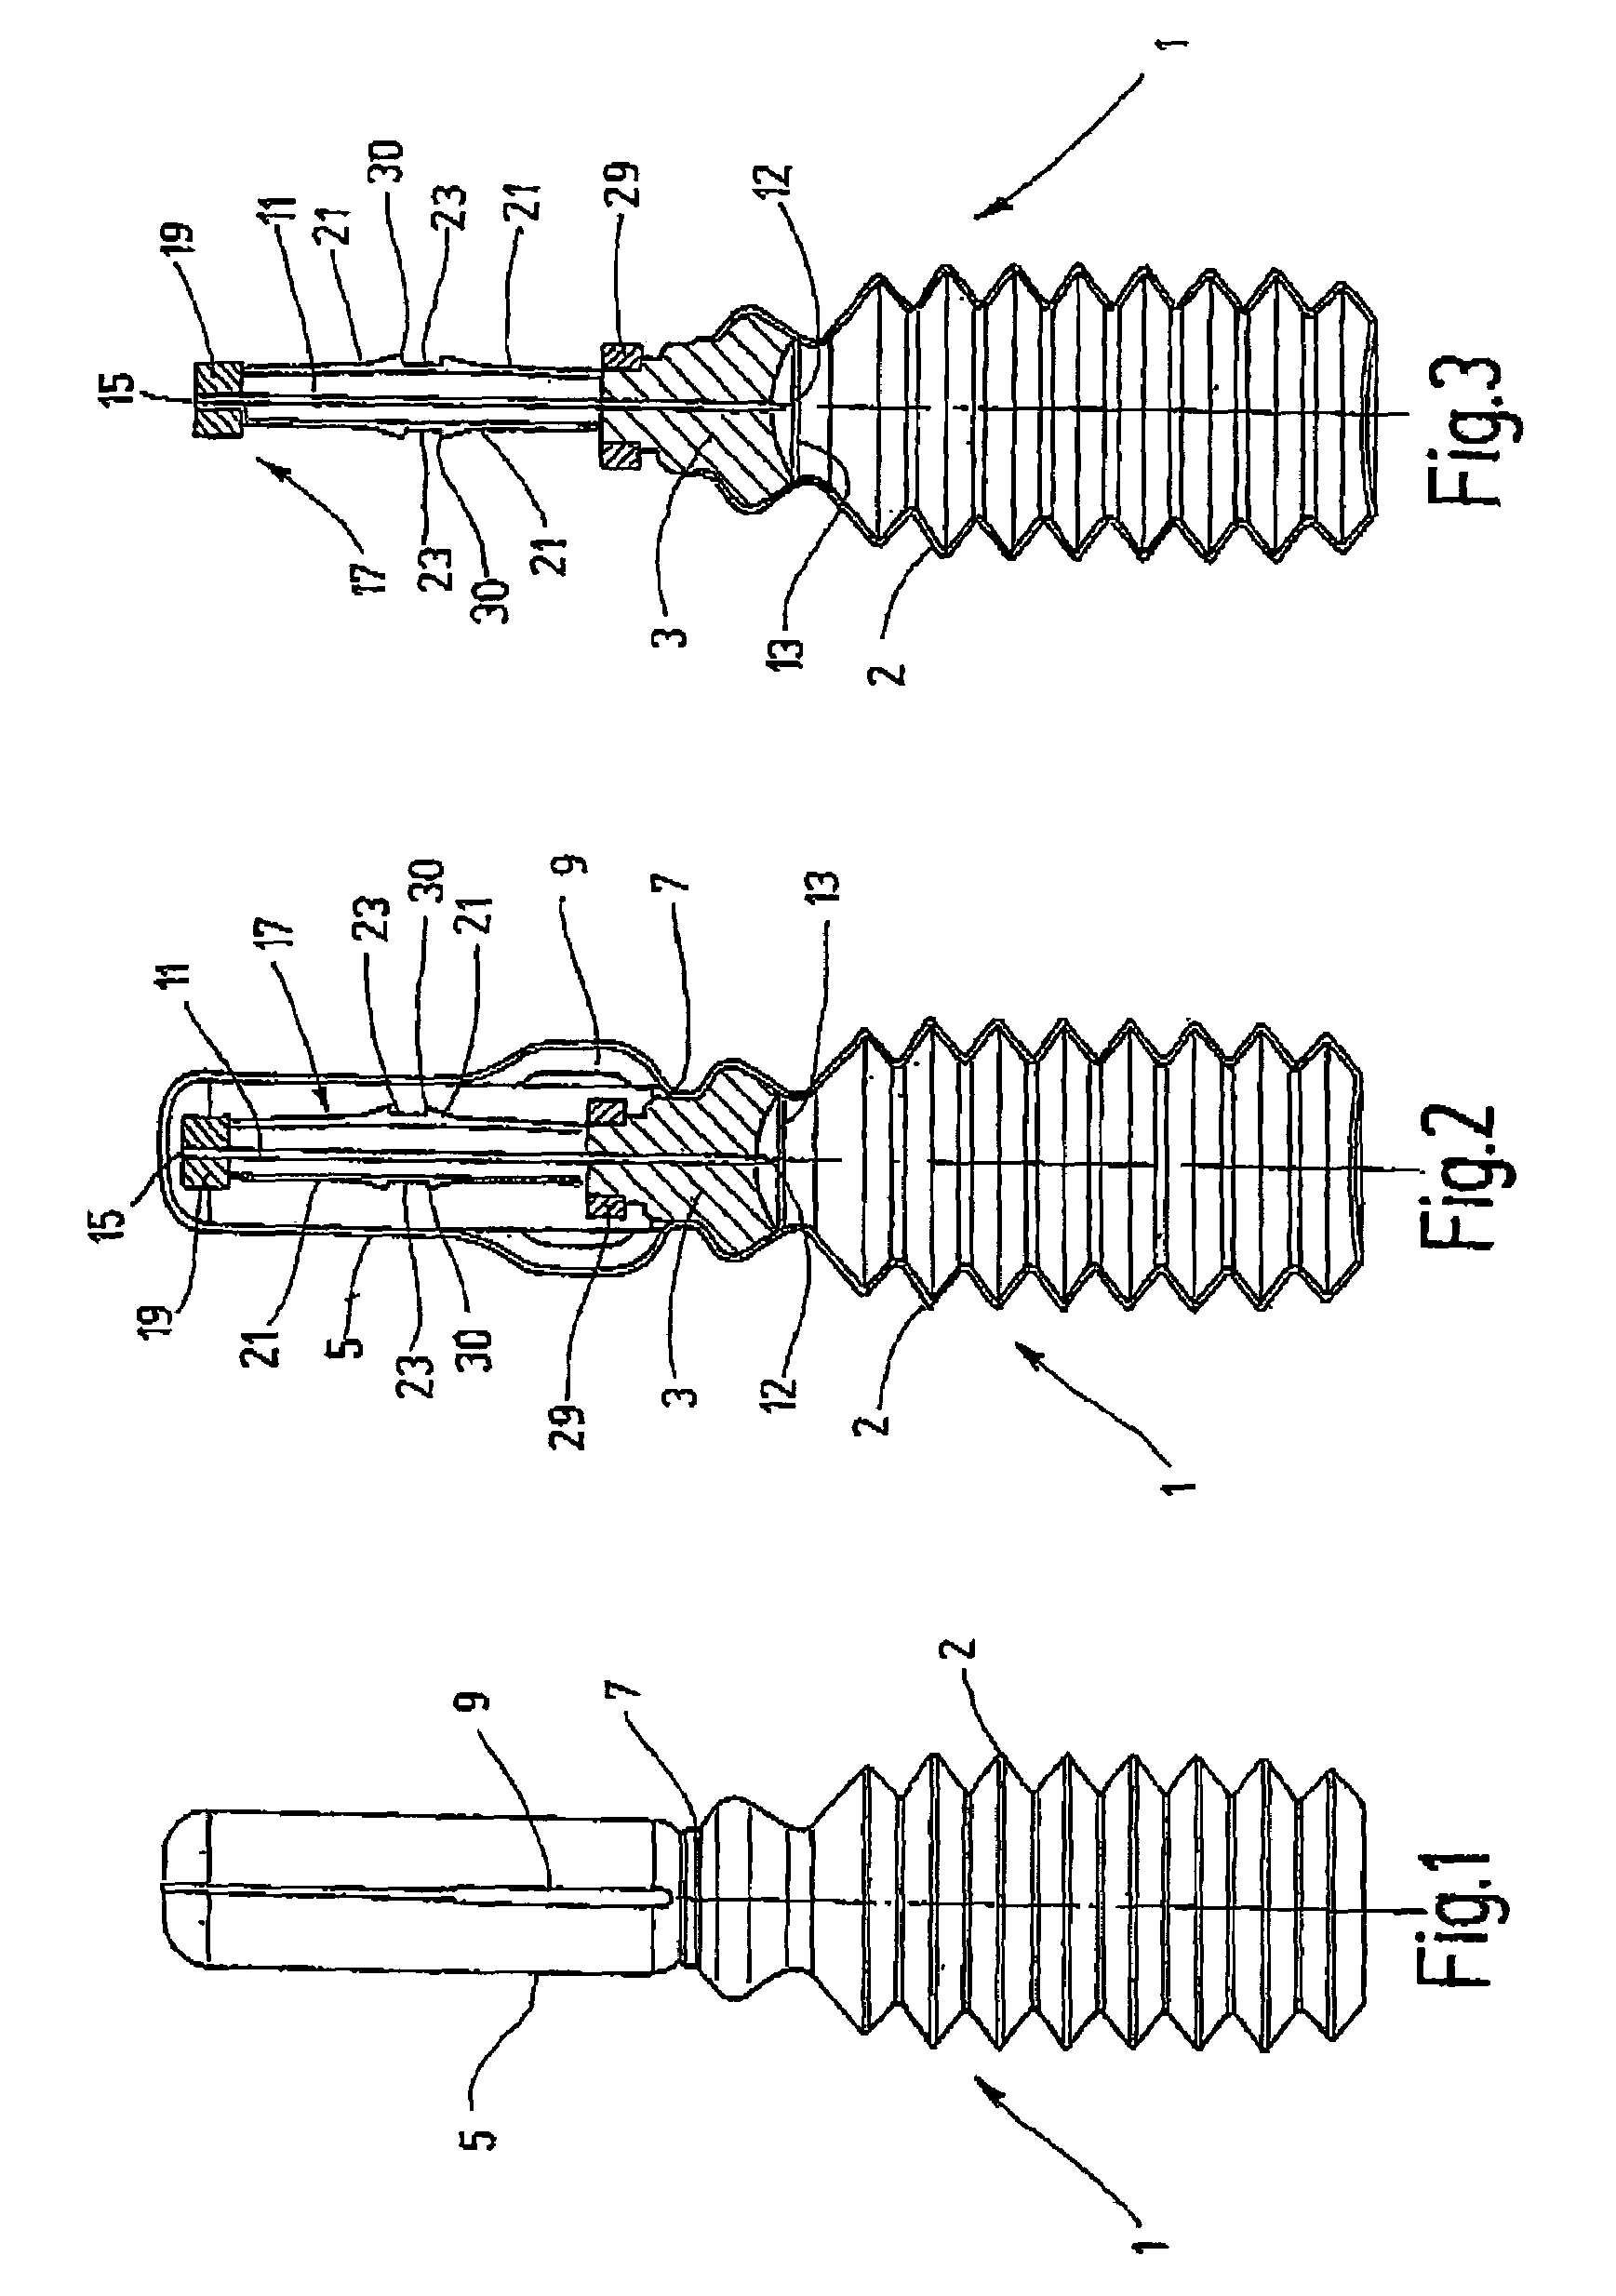 Device for distributing substances